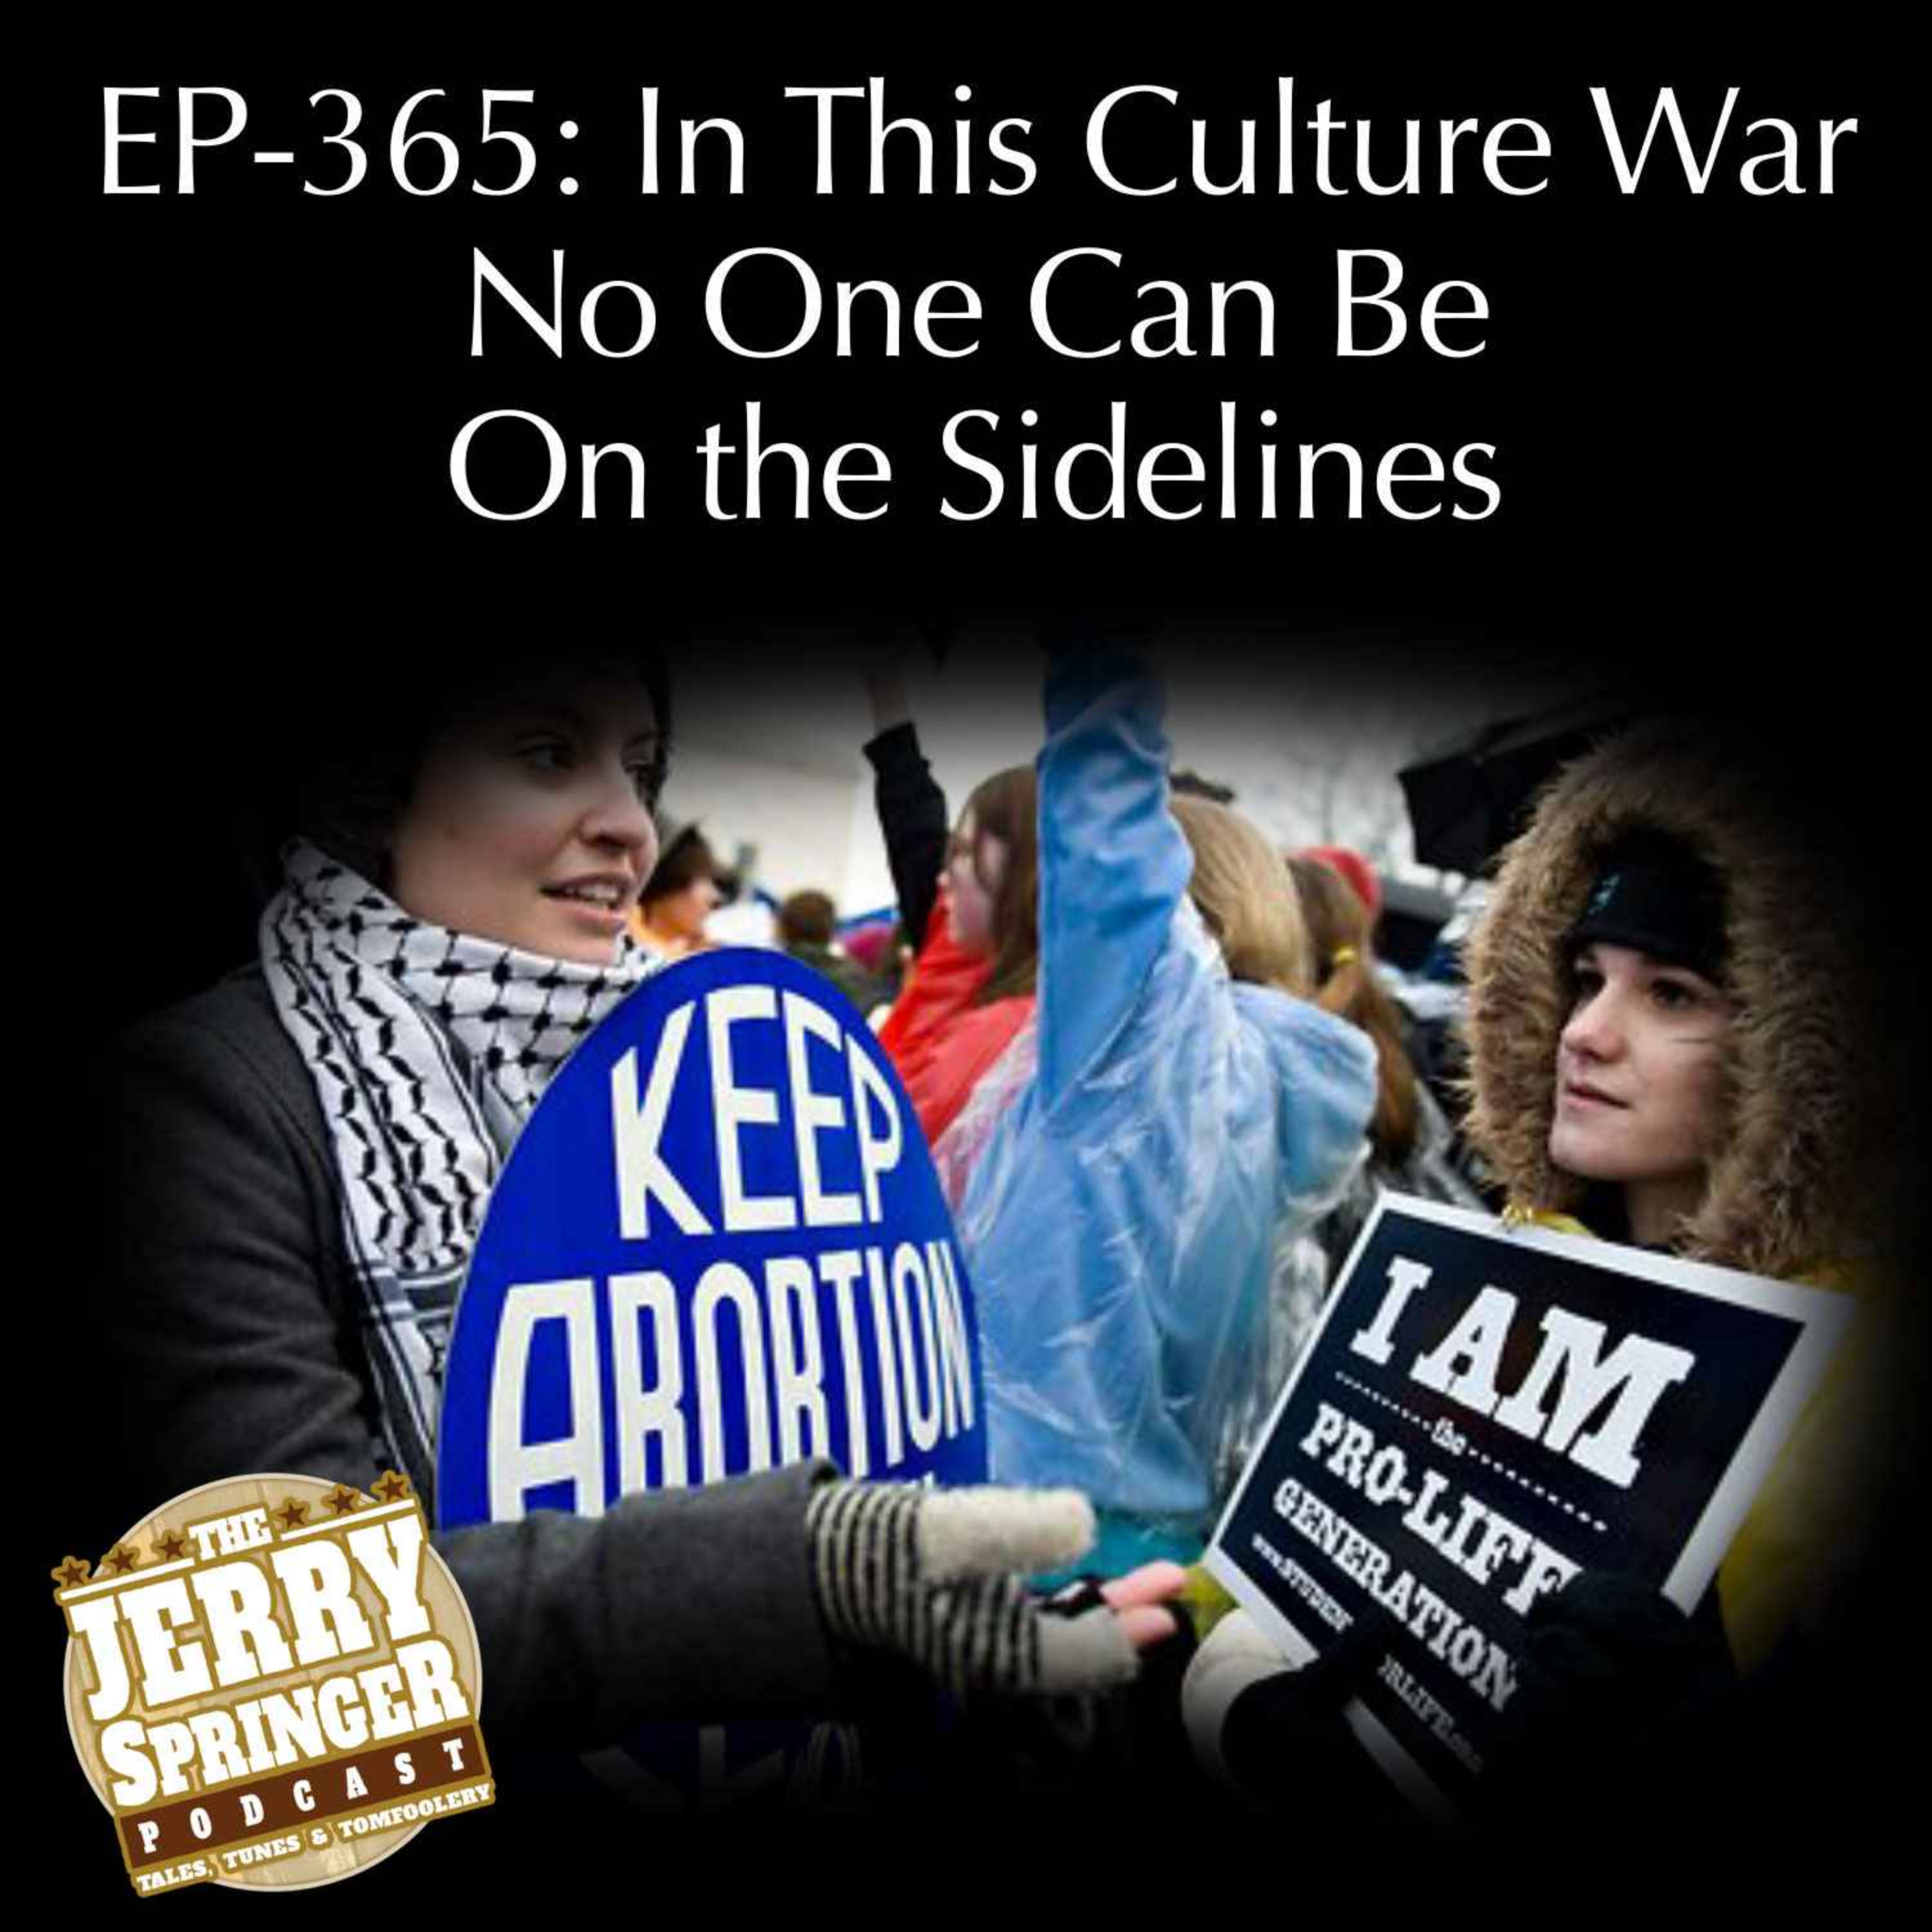 In This Culture War No One Can Be On the Sidelines: EP - 365